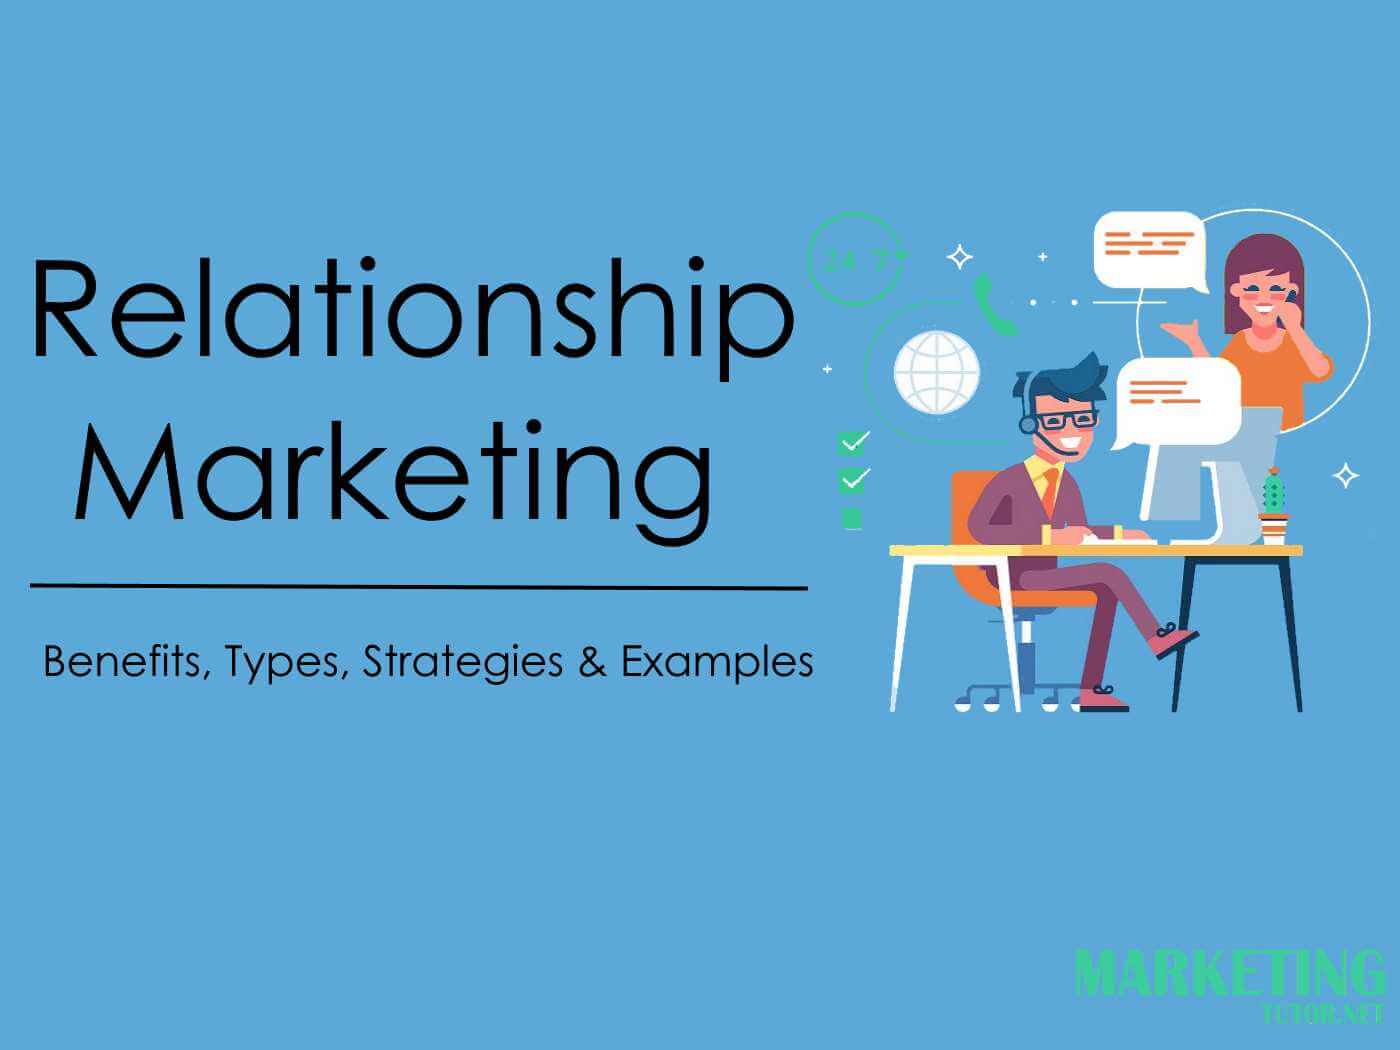 what are the uses of relationship marketing